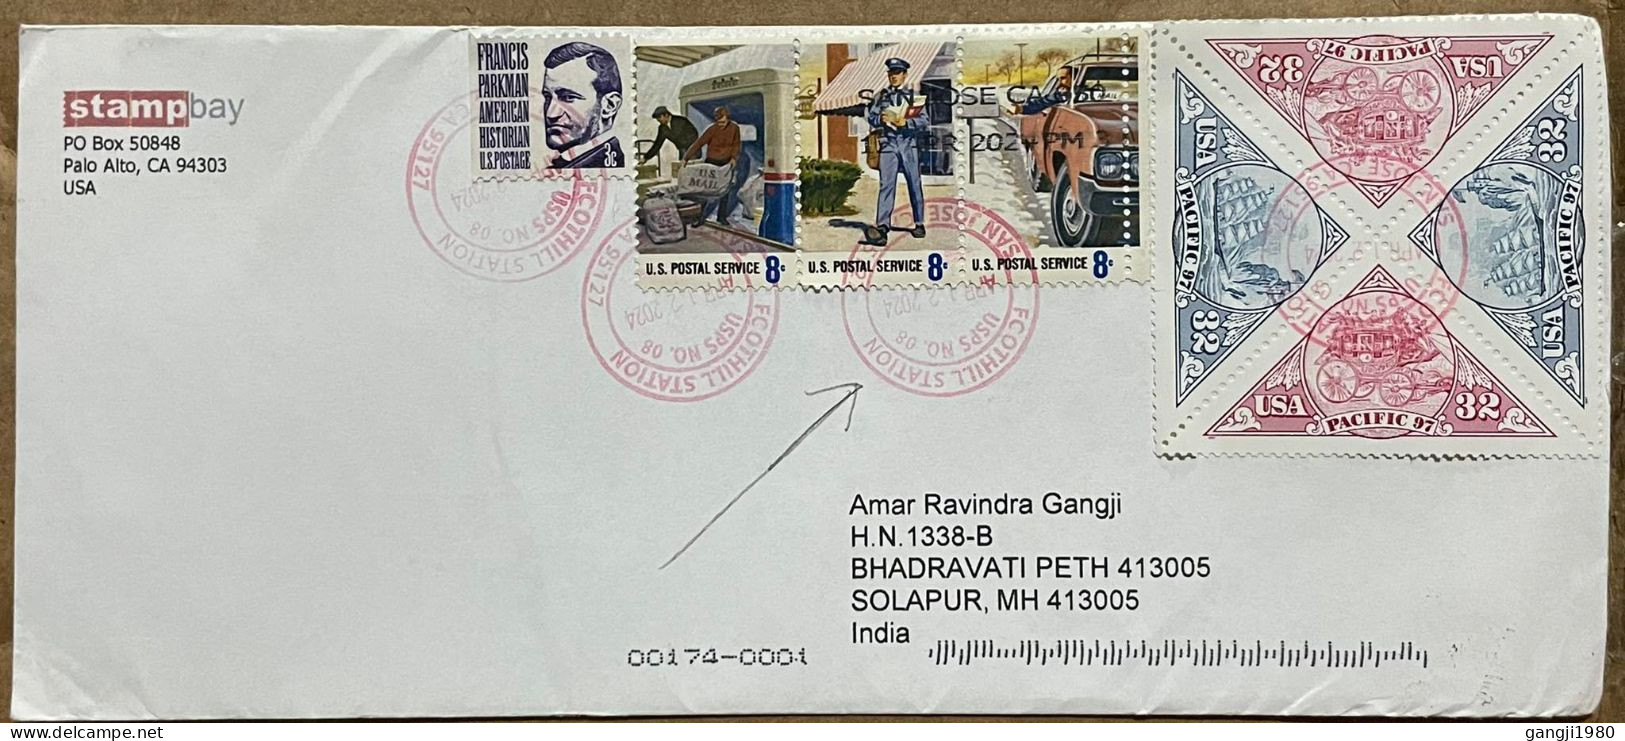 USA TO INDIA COVER USED 2024, ADVERTISING STAMP BAY, POSTMAN, PACIFIC 97 TANGLE STAMP, 8 STAMP, FOOTHILL STATION CITY CA - Covers & Documents